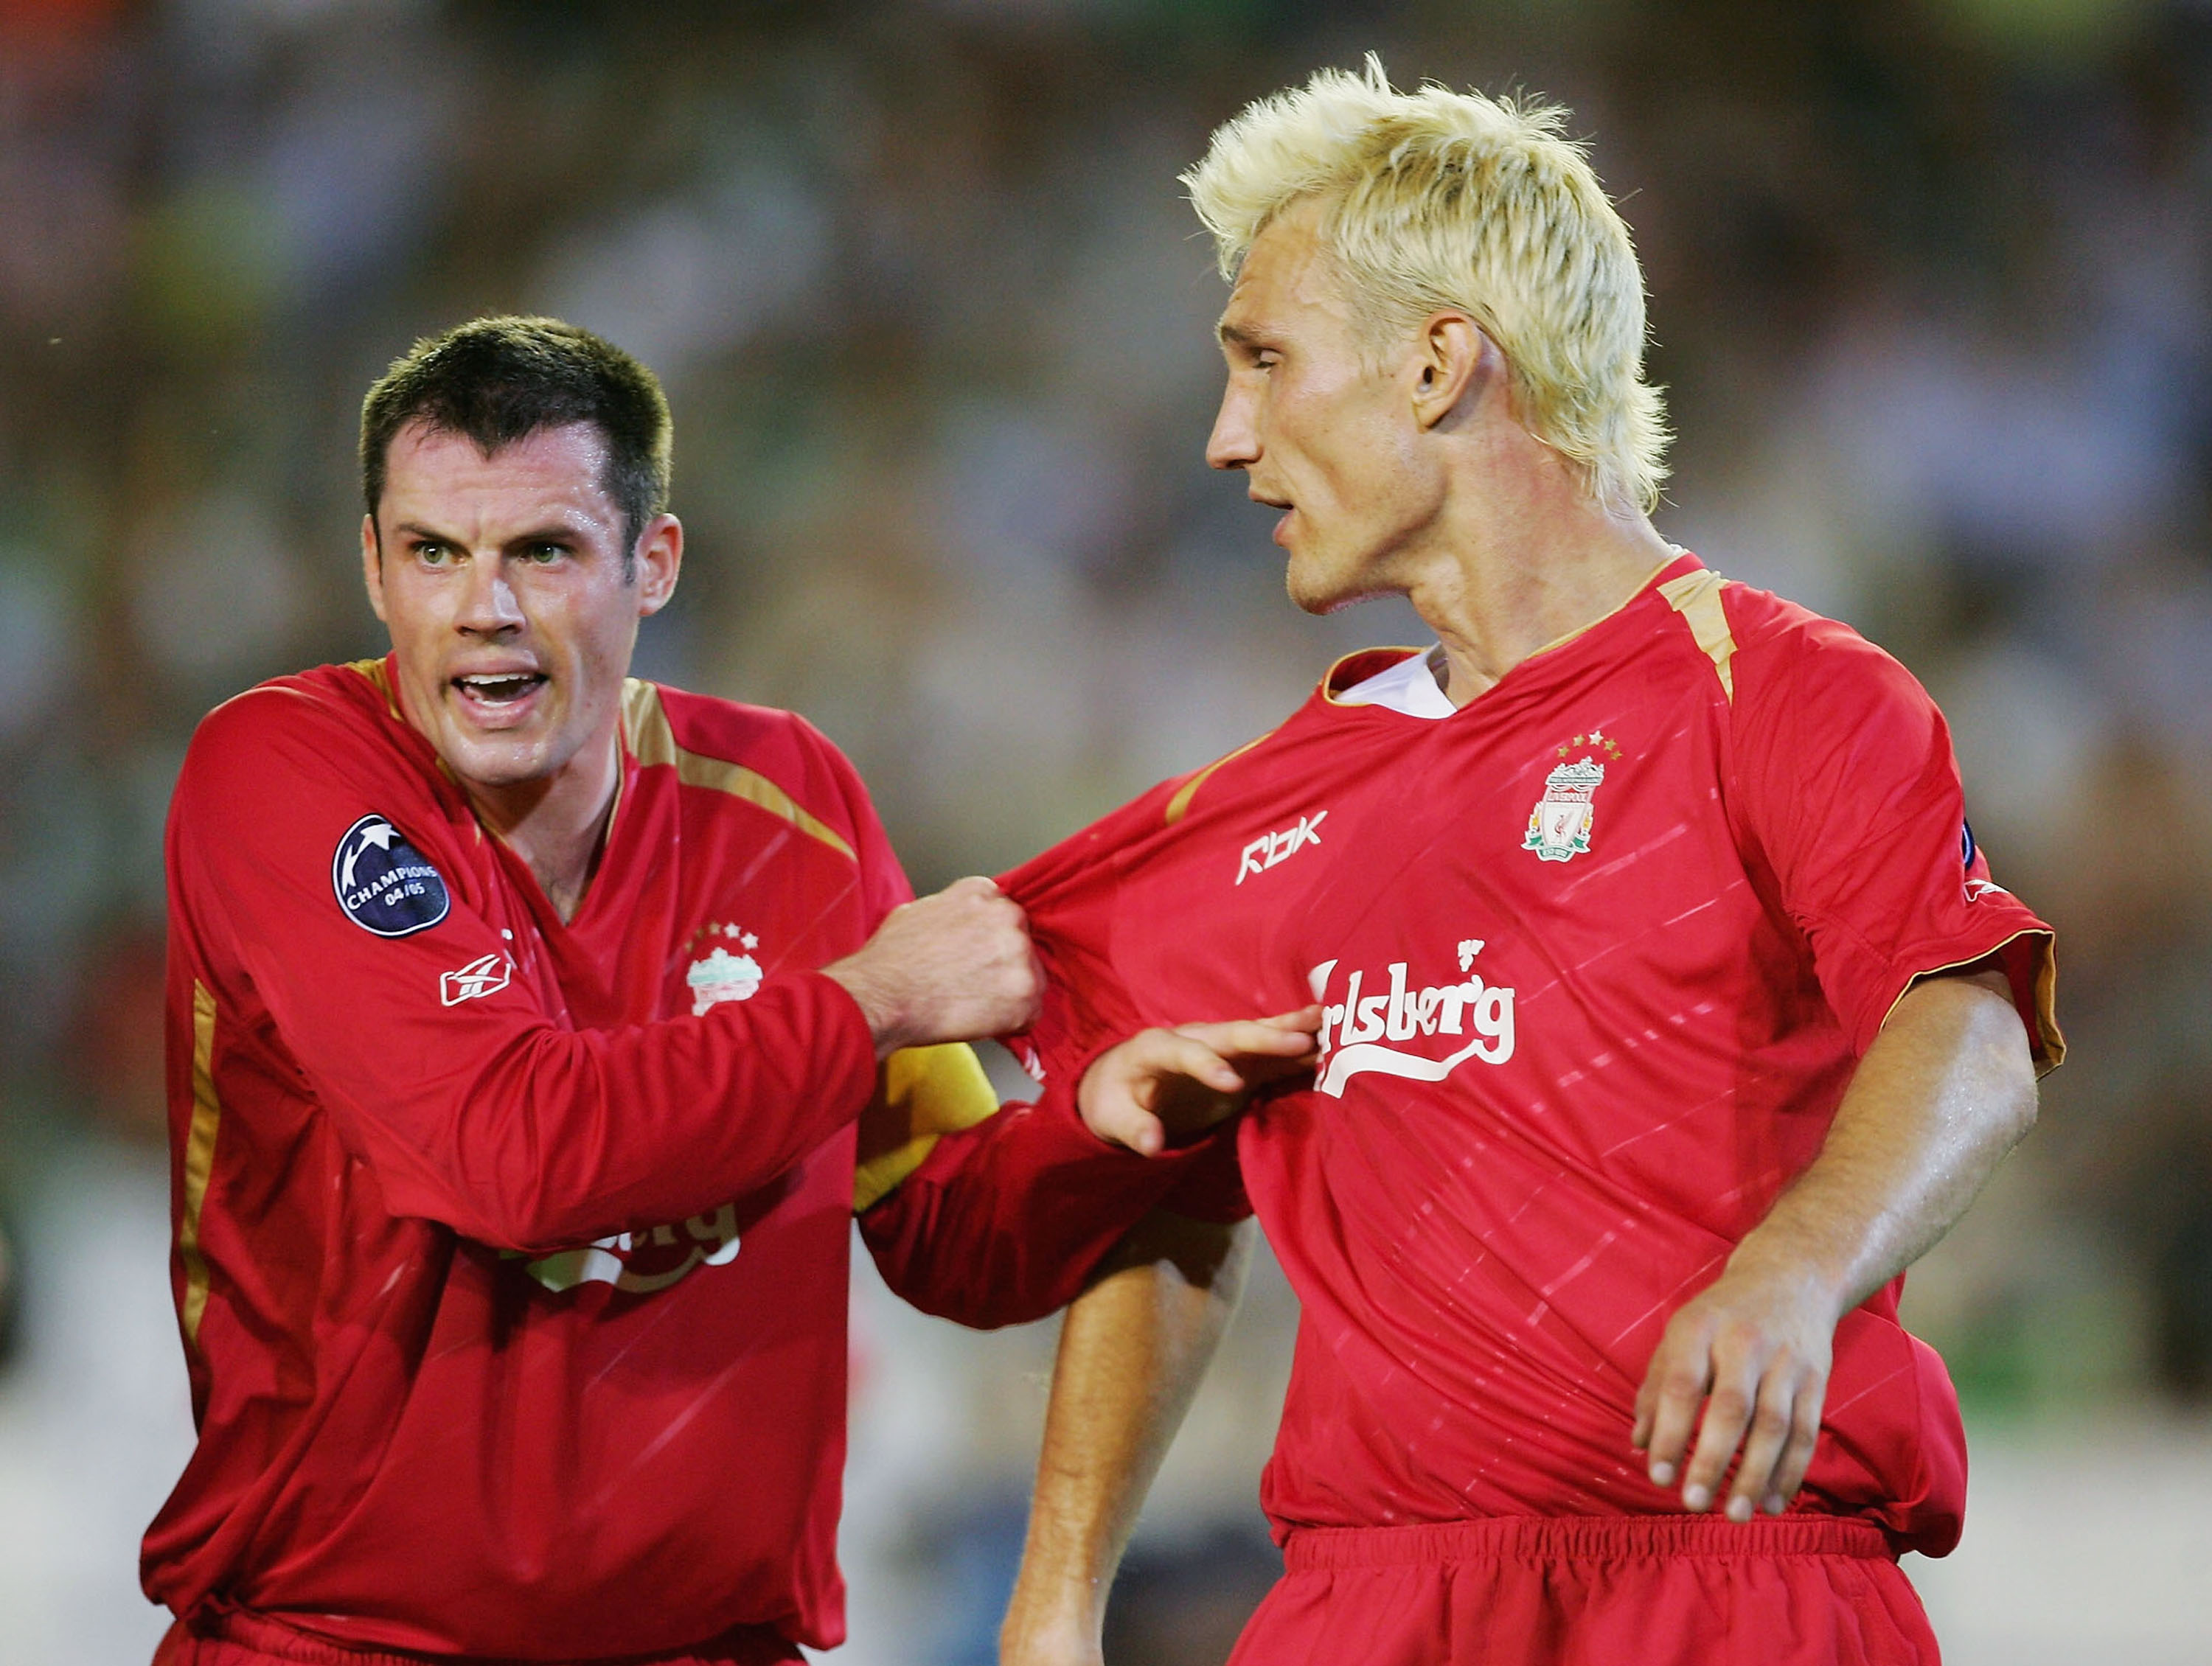 SEVILLE, SPAIN -  SEPTEMBER 13: Liverpool captain Jamie Carragher barks orders to team-mate Sami Hyypia during a second half onslaught by Real Betis during the UEFA Champions League Group G match between Real Betis and Liverpool at the Estadio Ruiz de Lop